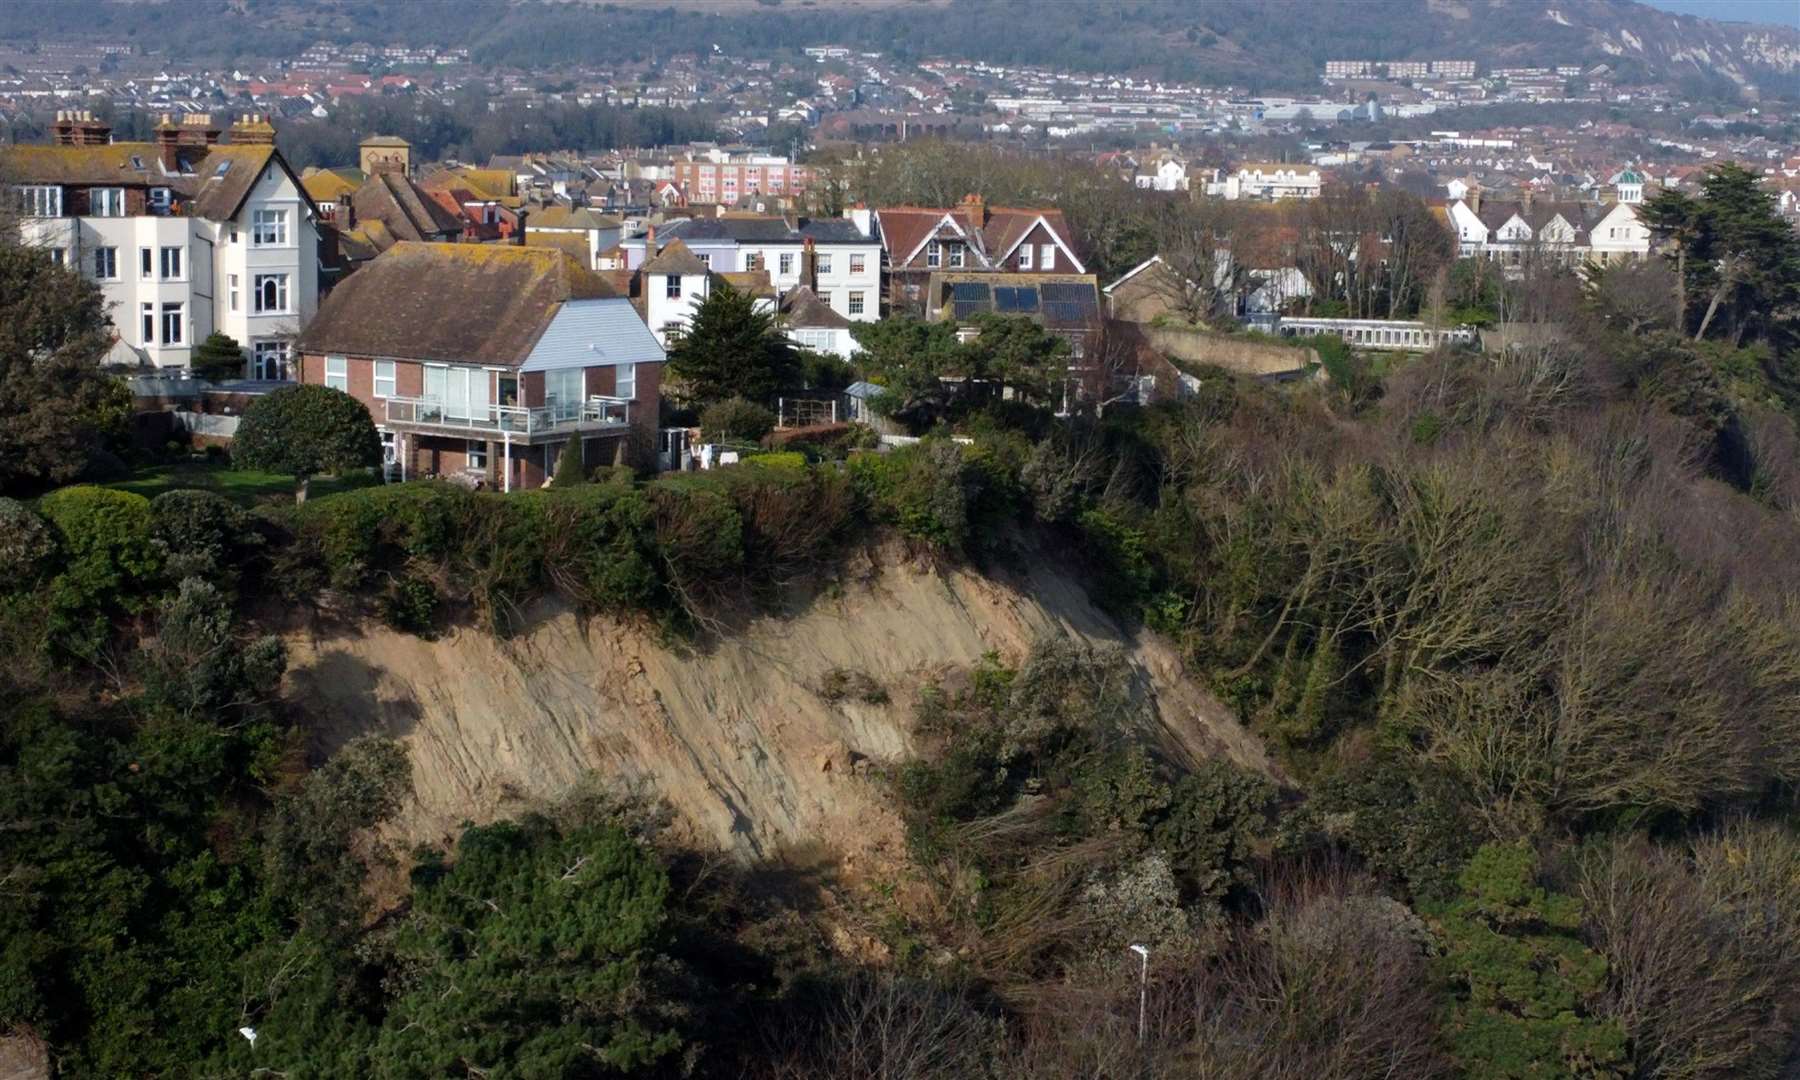 There have been numerous landslides in Folkestone, including on Remembrance Road.Picture: Barry Goodwin